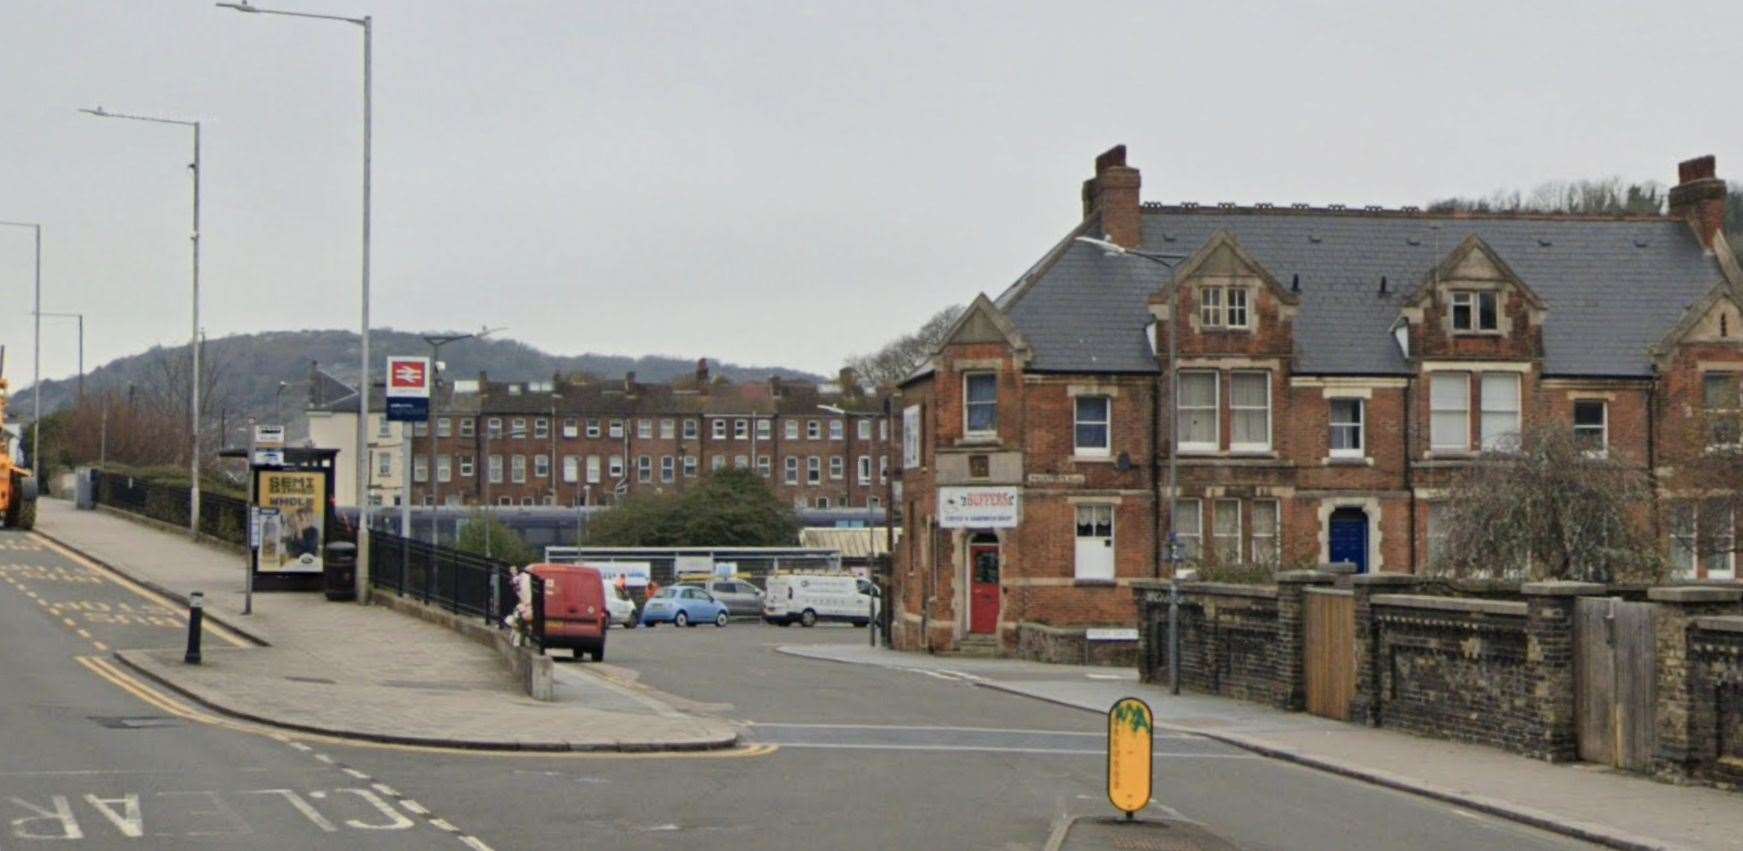 The incident occurred on Folkestone Road, near to the railway station. Picture: Google